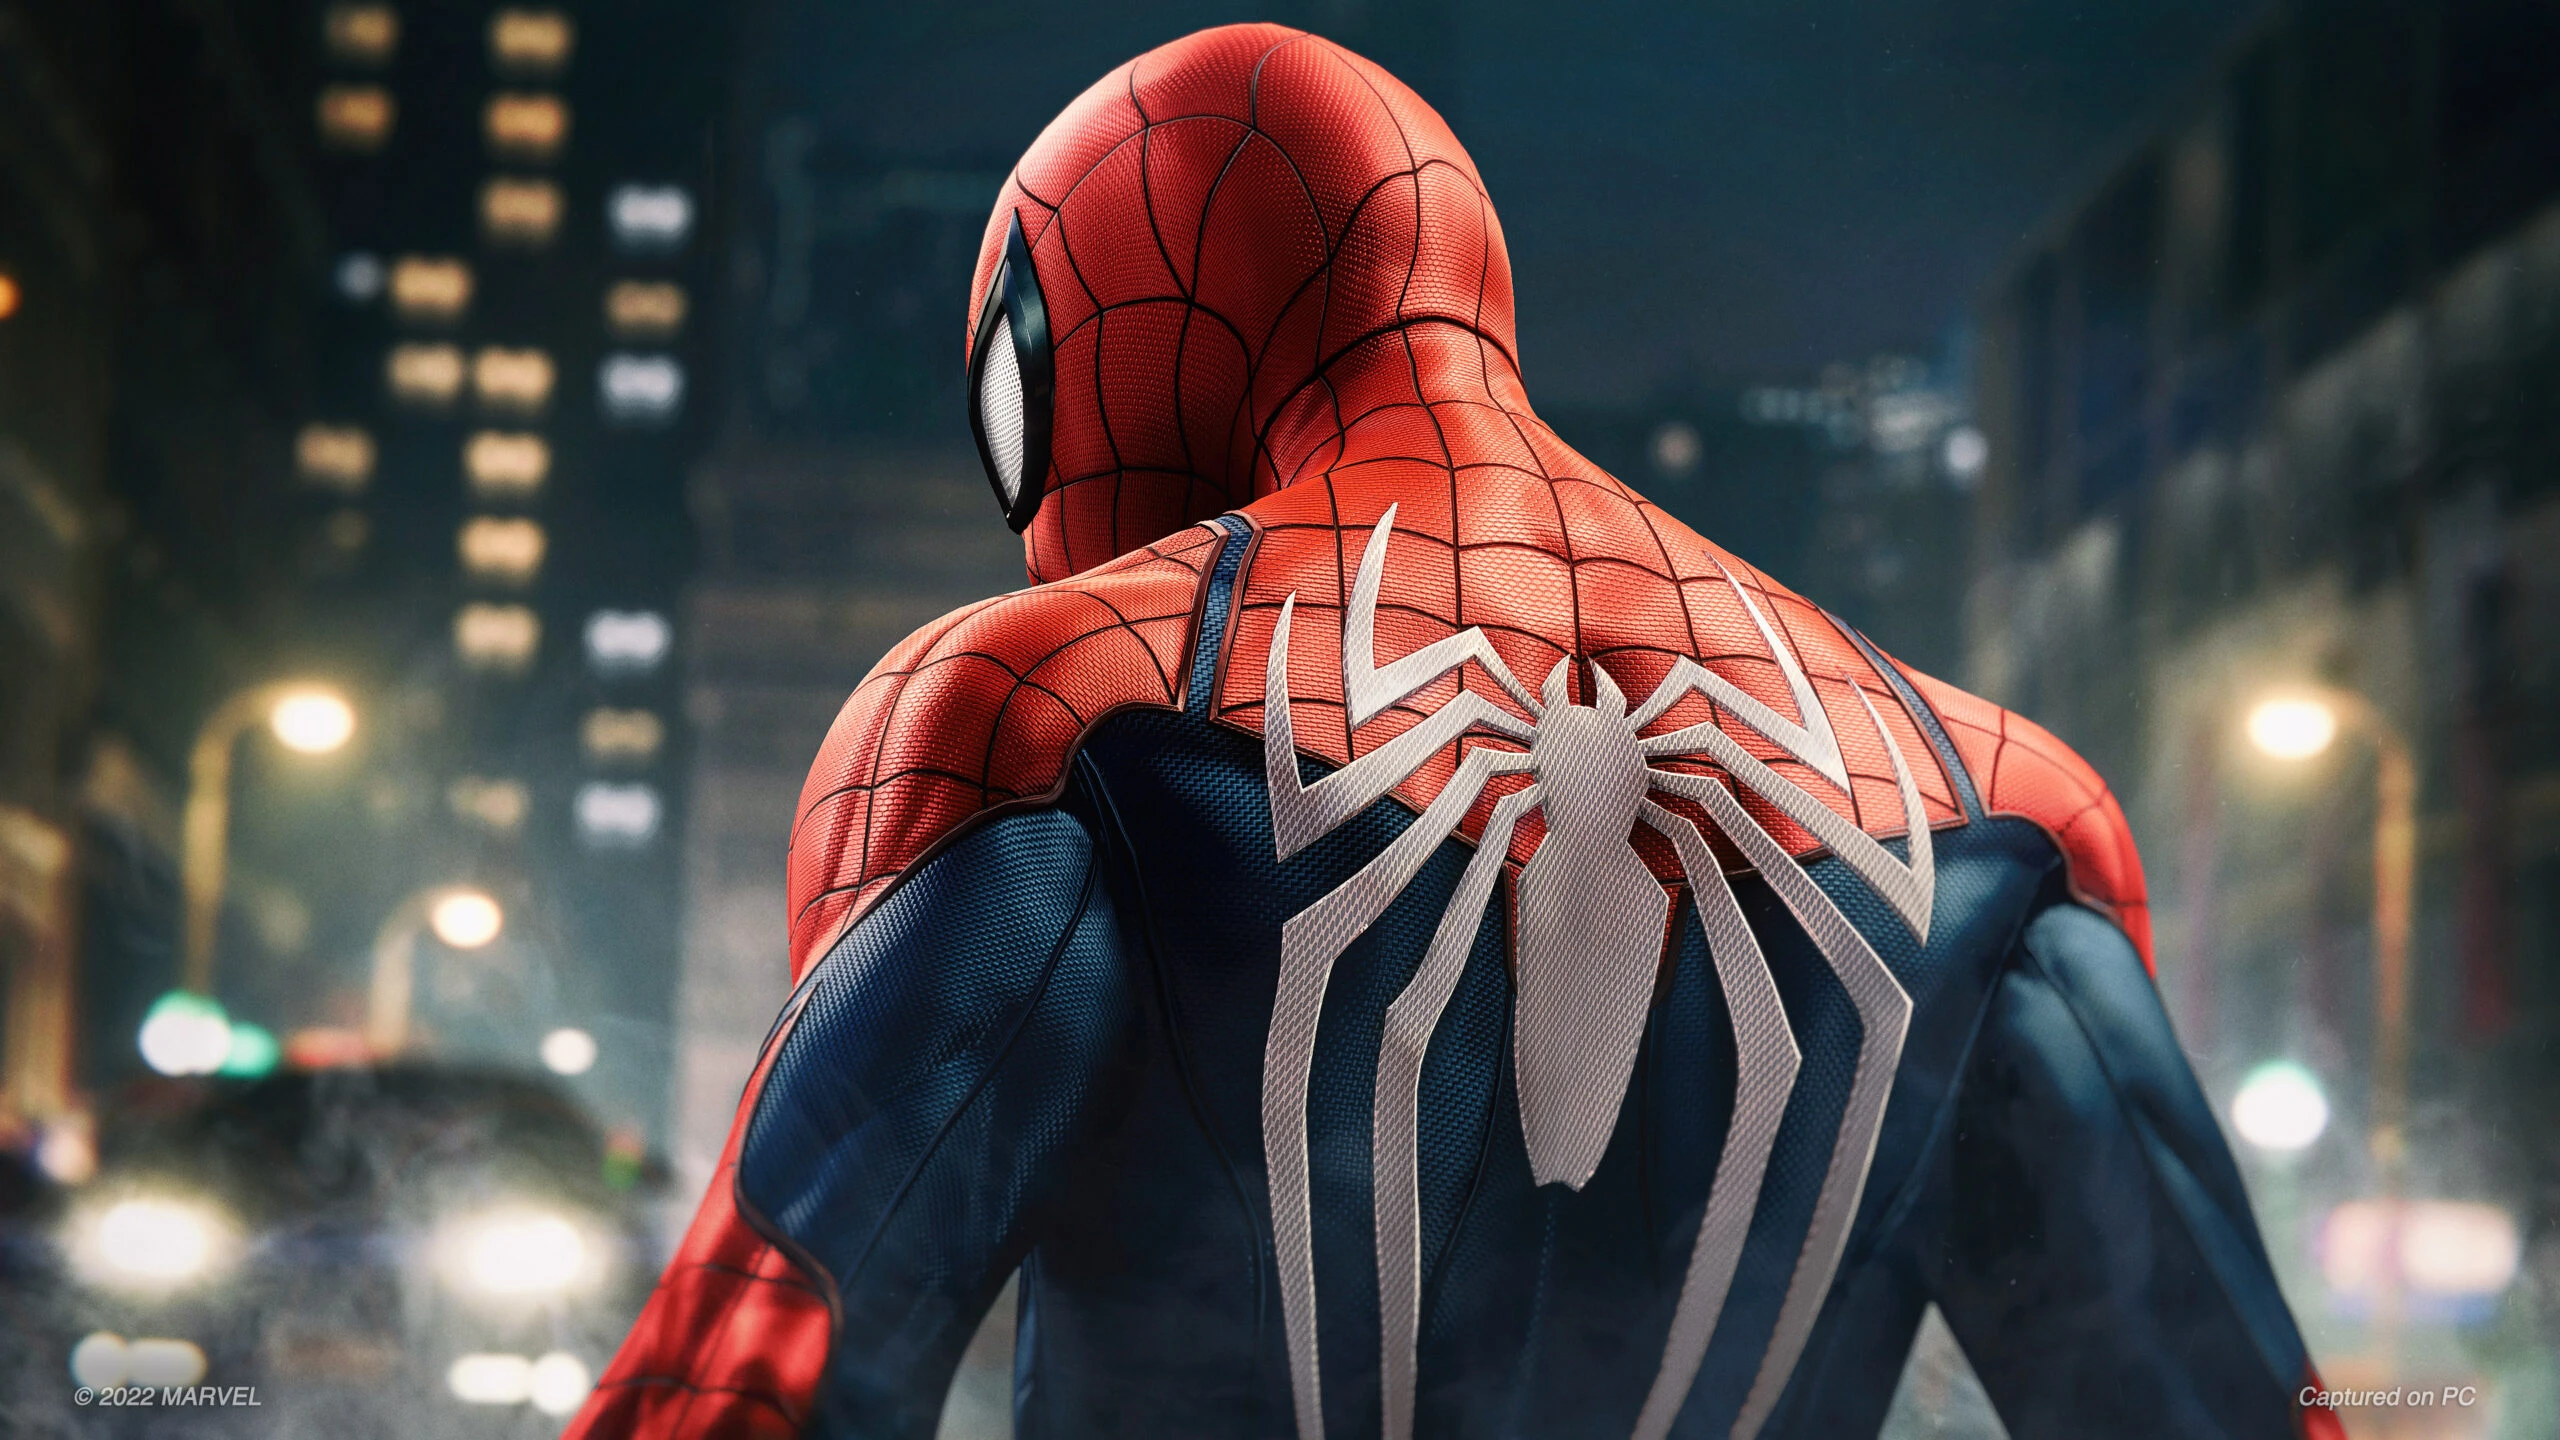 Change Main menu music in Spiderman Remastered PC at Marvel's